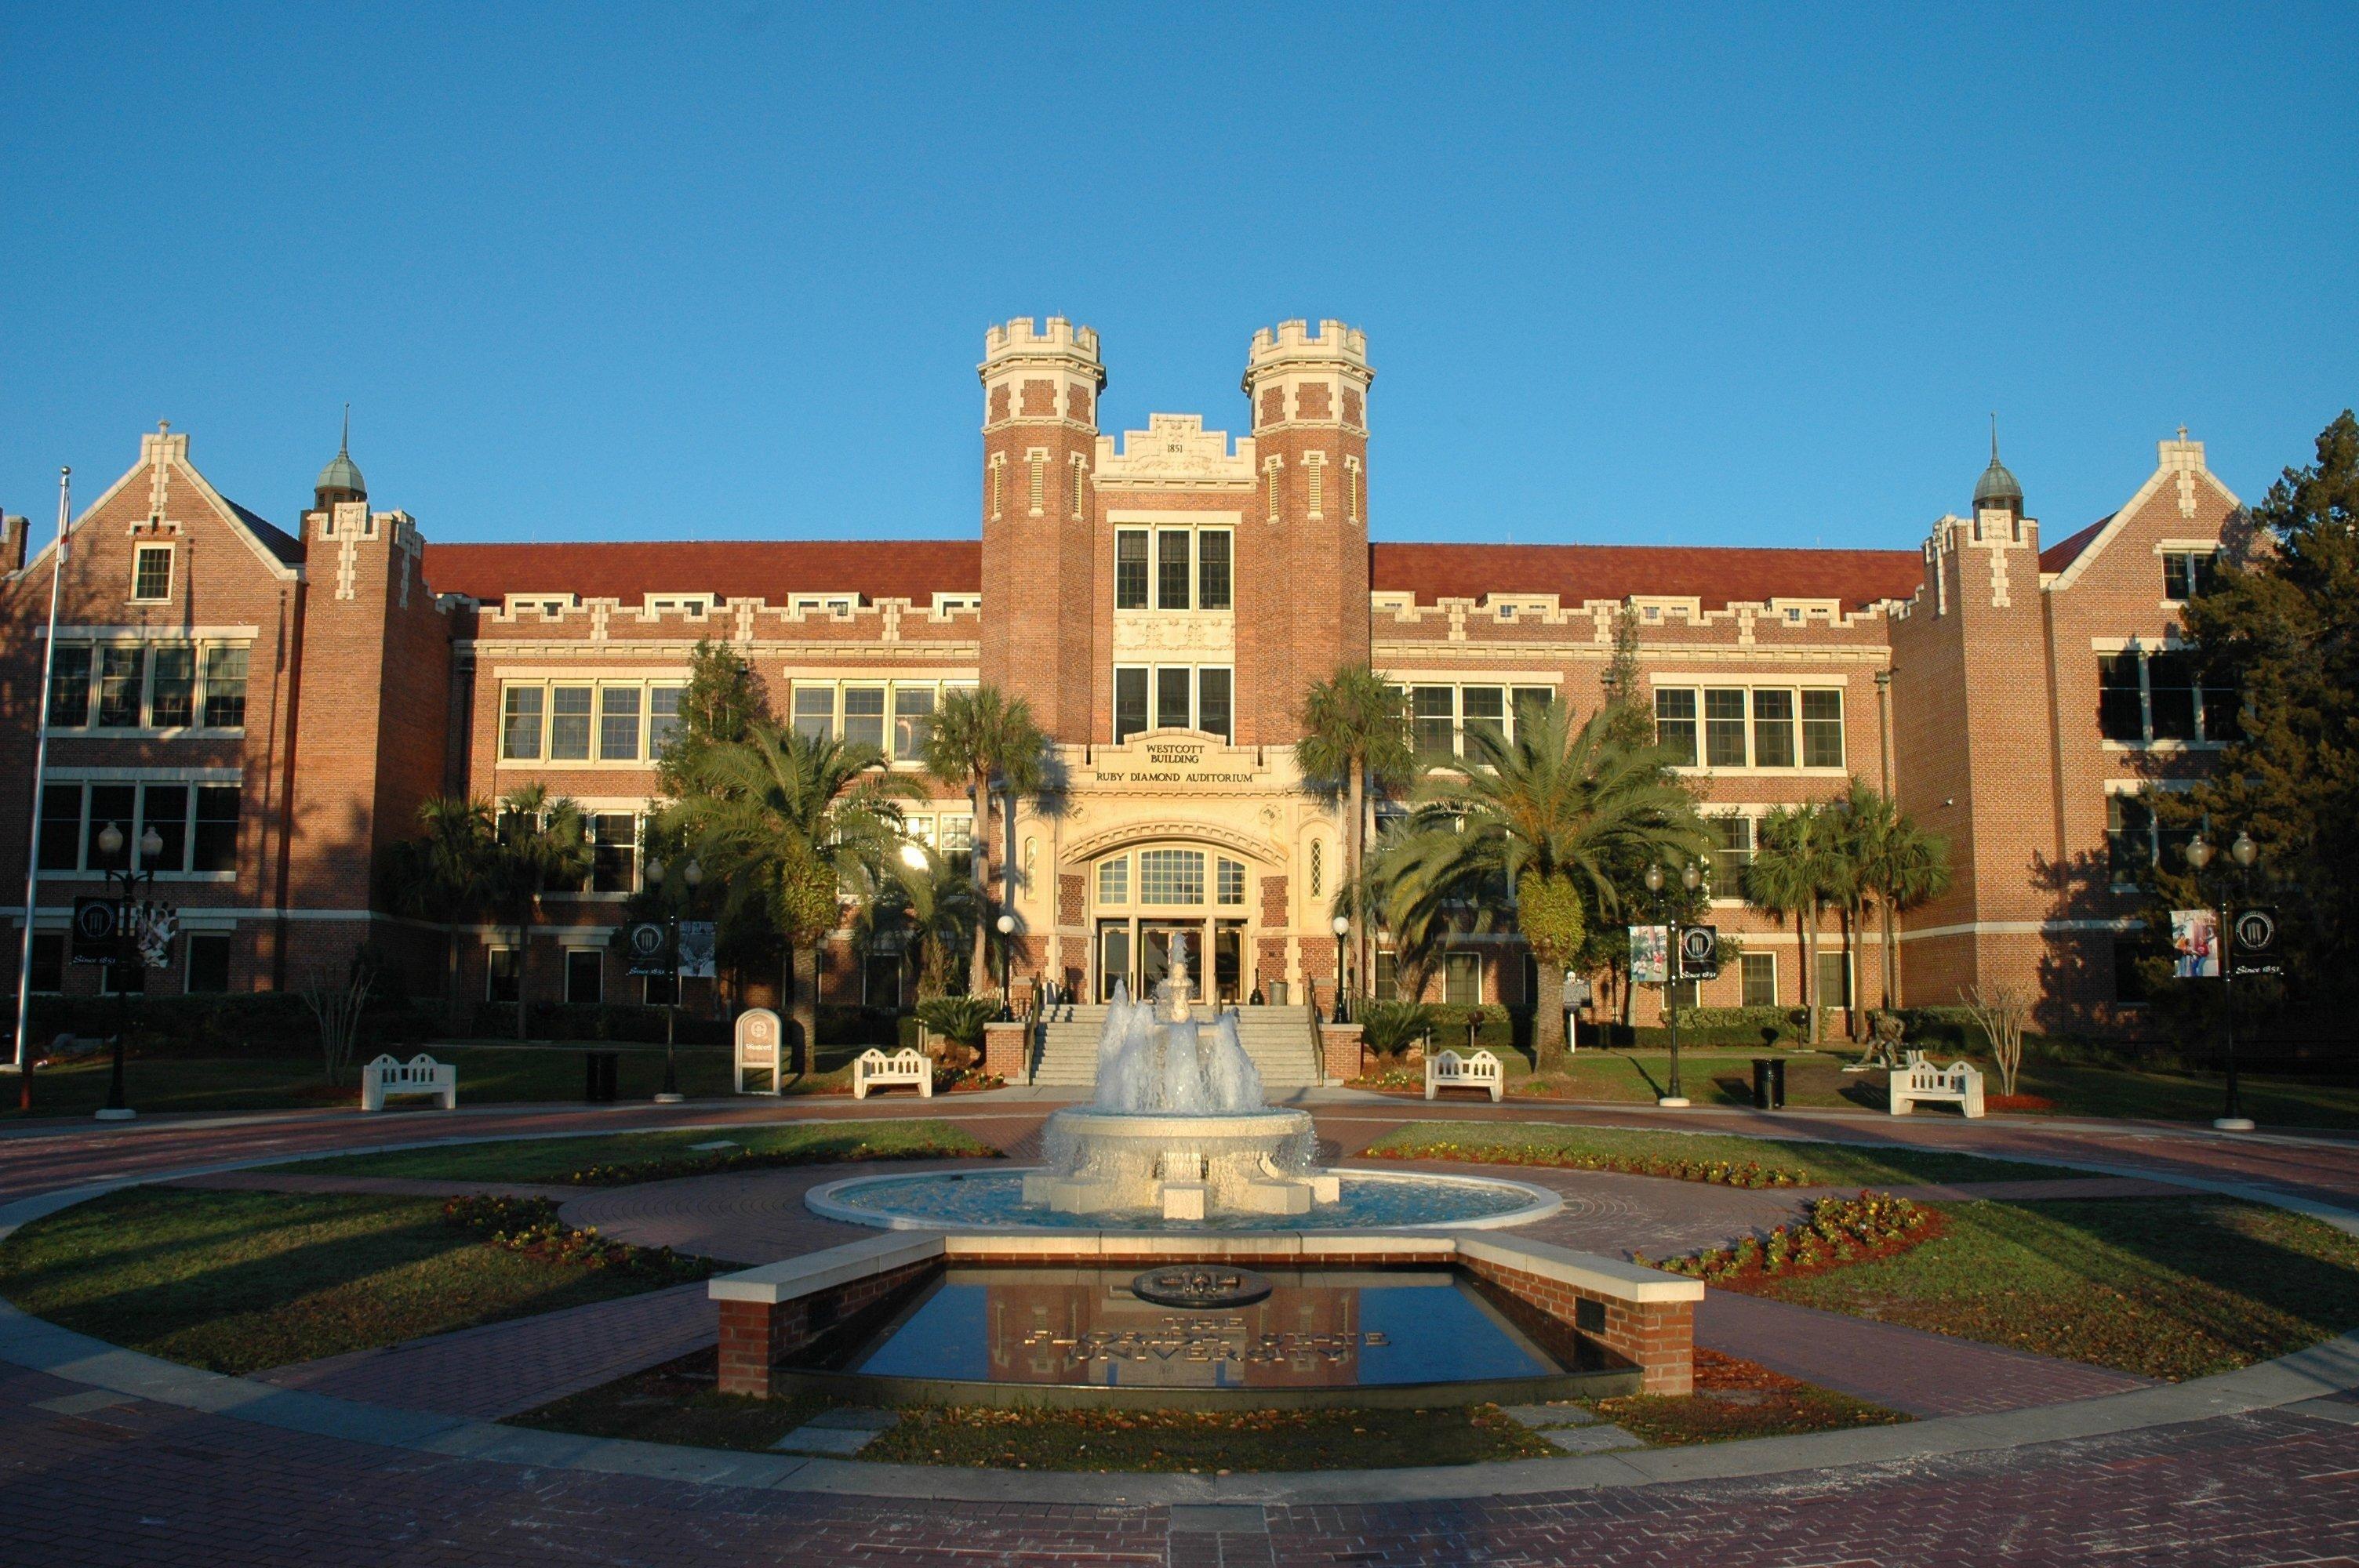 FSU earns No. 26, edging closer to 25 ranking in U.S. News & Report's "Best Colleges"